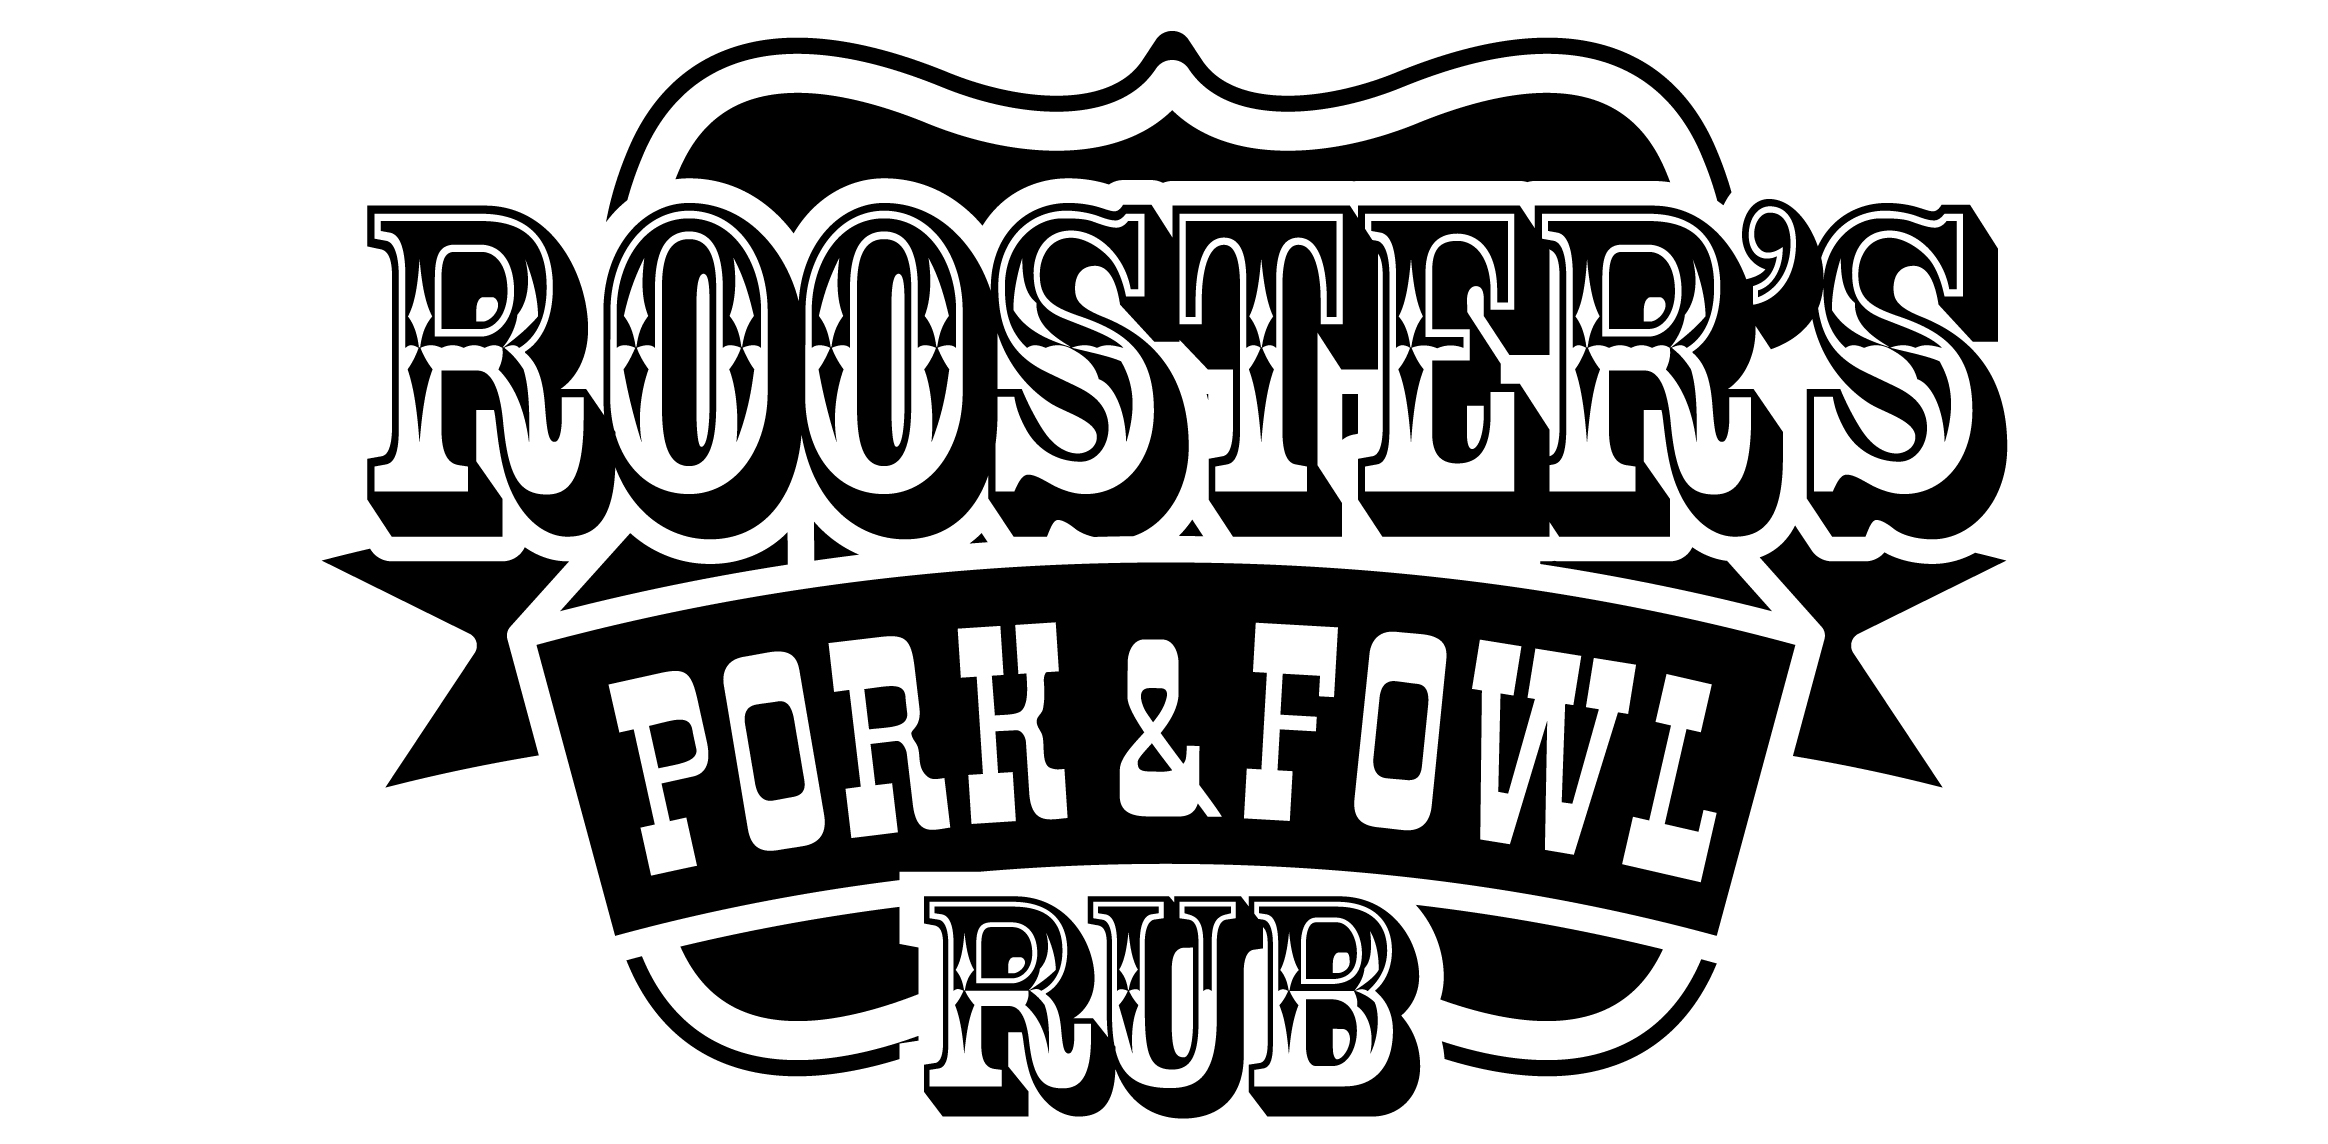 Rooster's badge logo